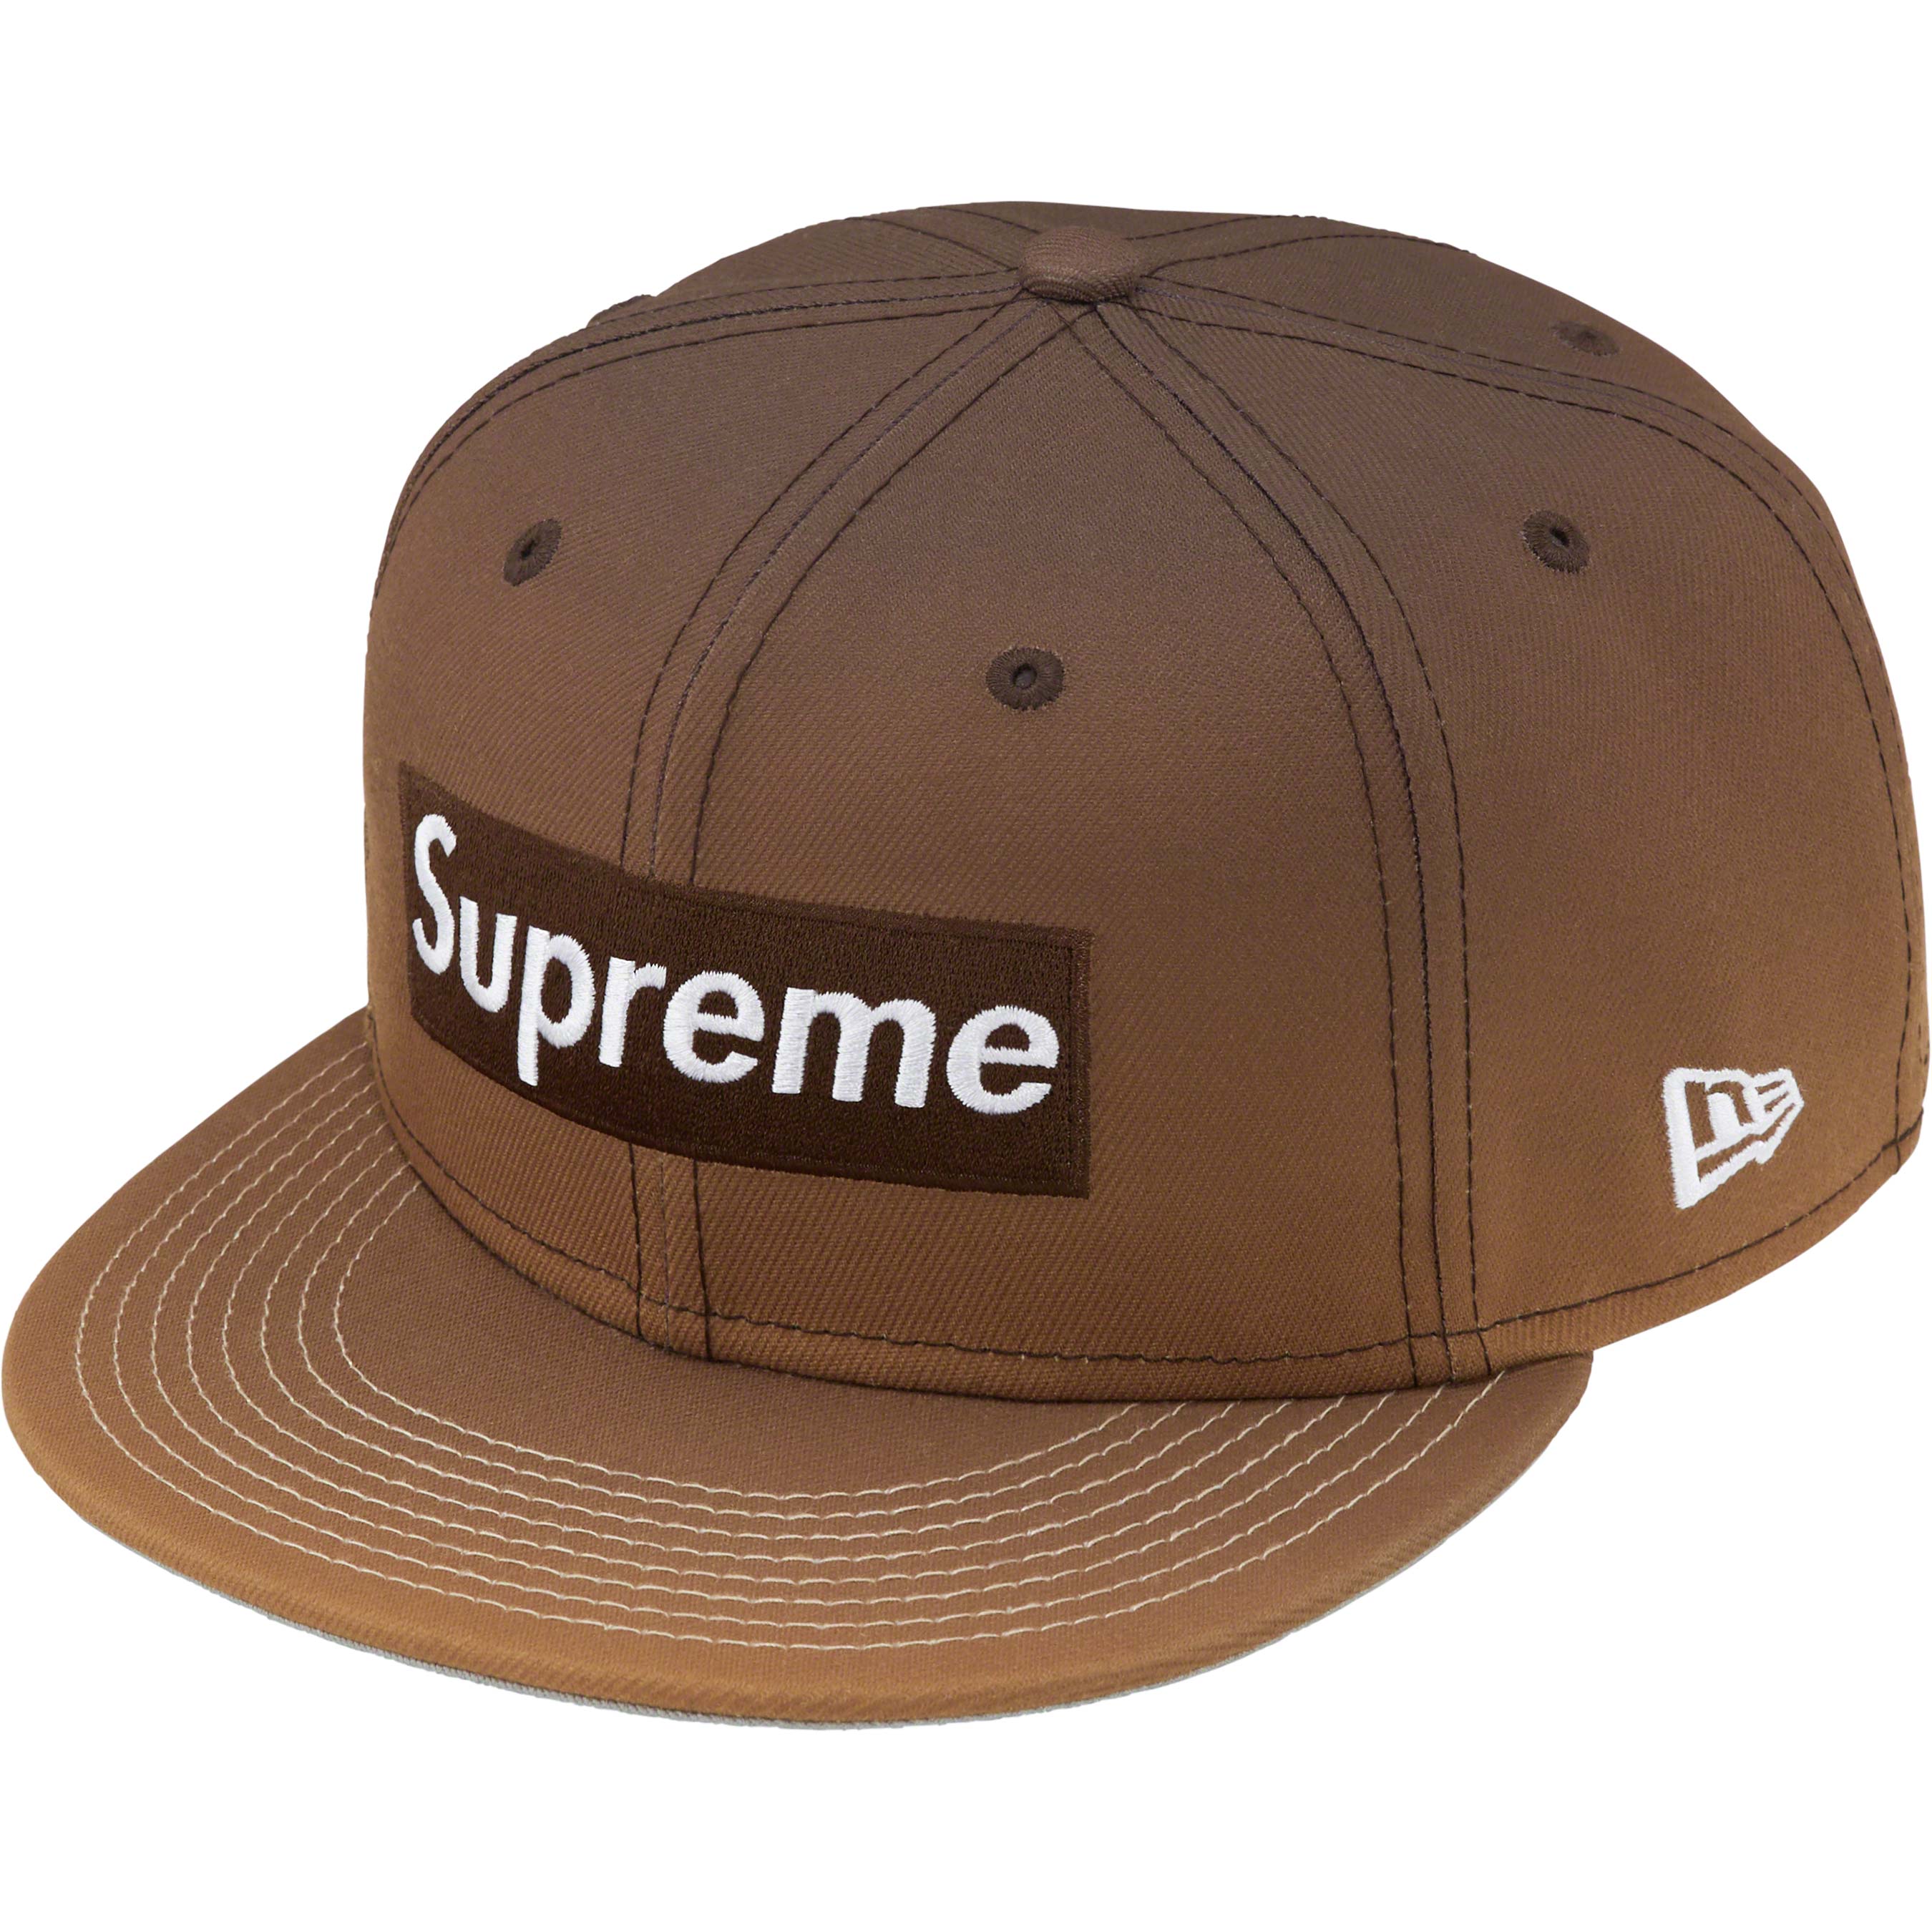 NEW Supreme x New Era Gradient Box Logo Fitted - Pink Size 7 3/8